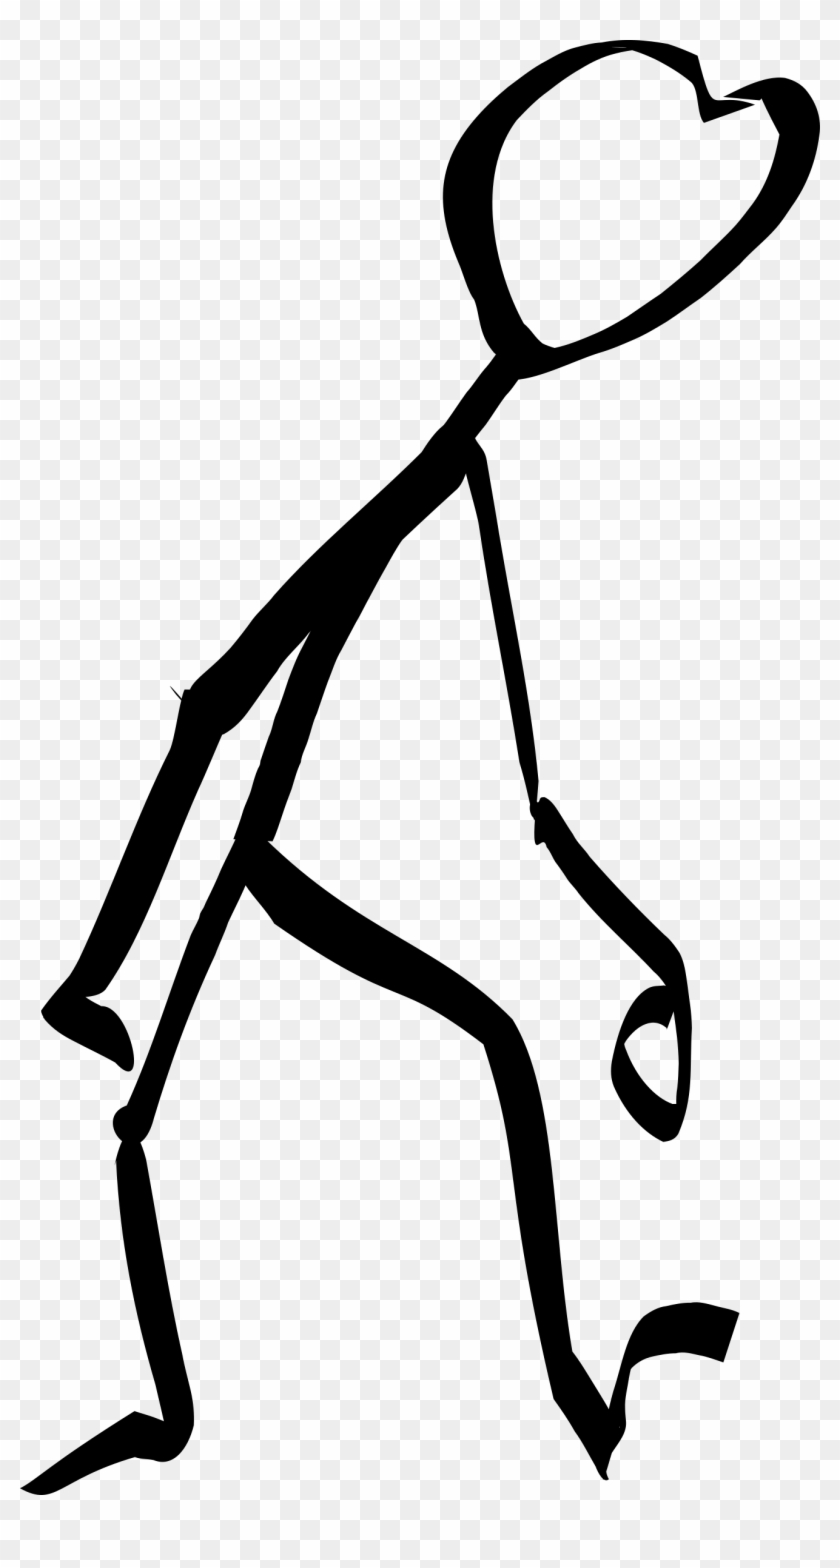 Tired - Tired Stick Figure #474030